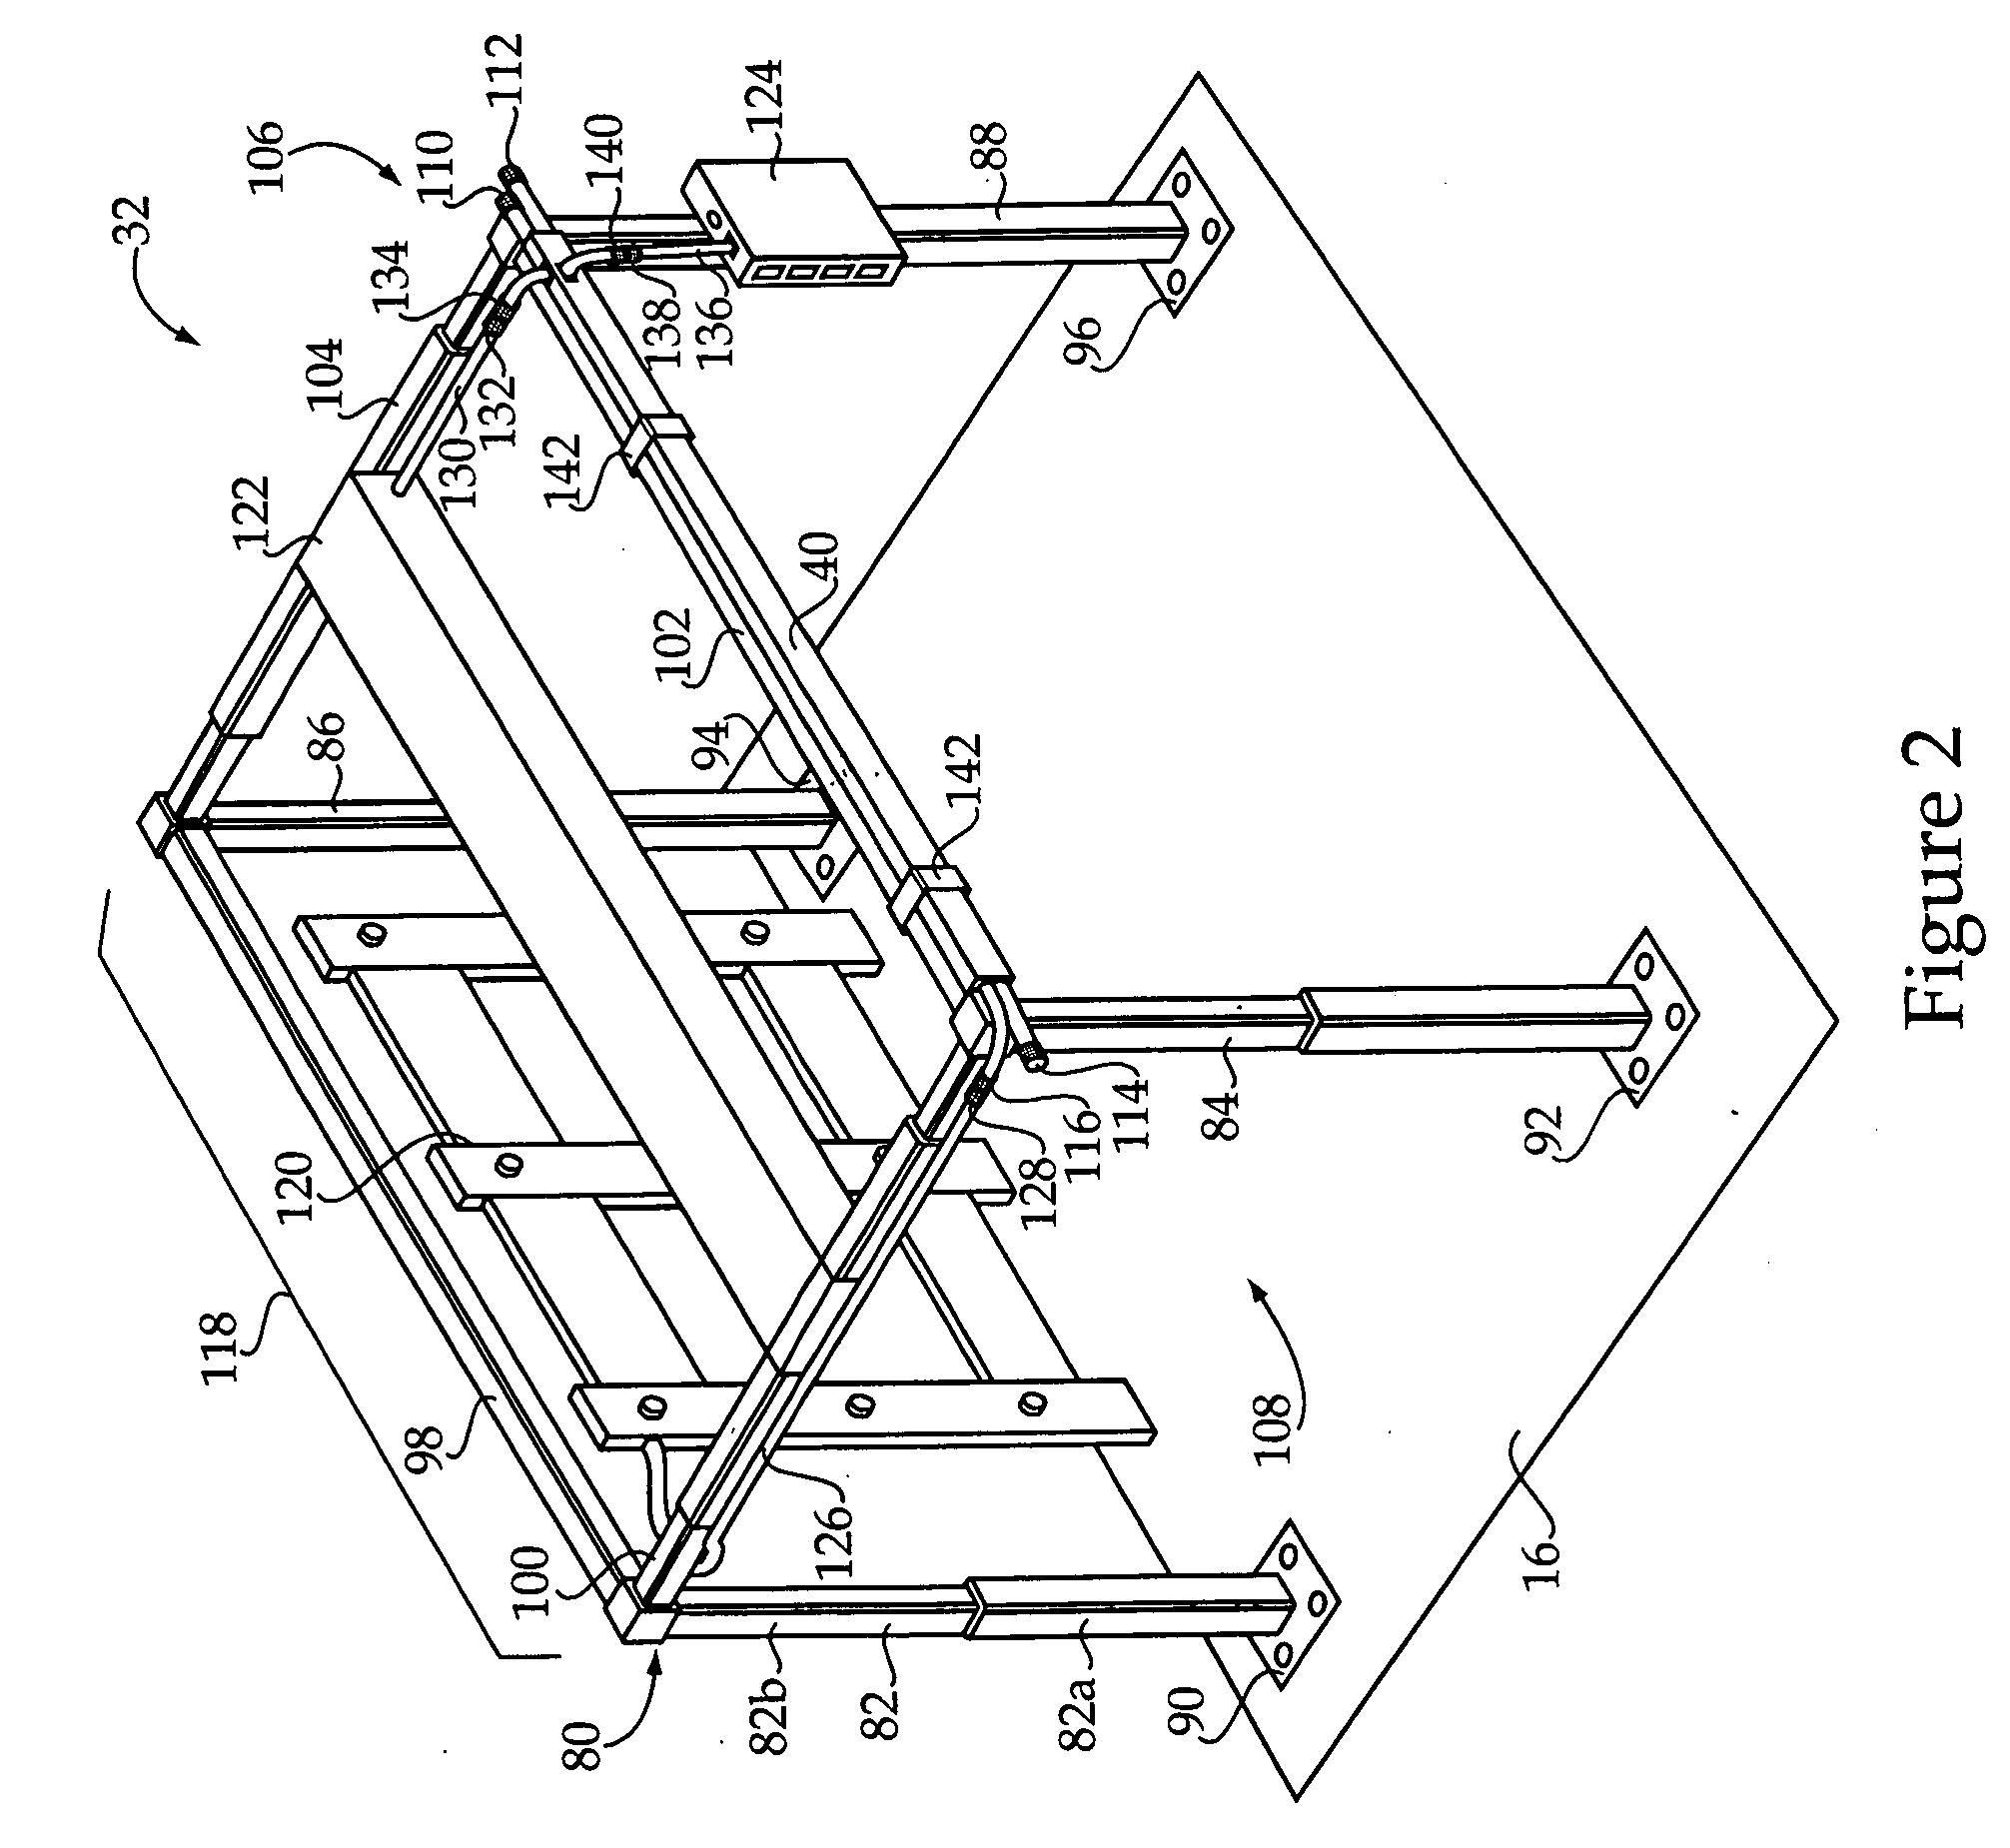 Friction drive material handling system including composite beam and method of operating same